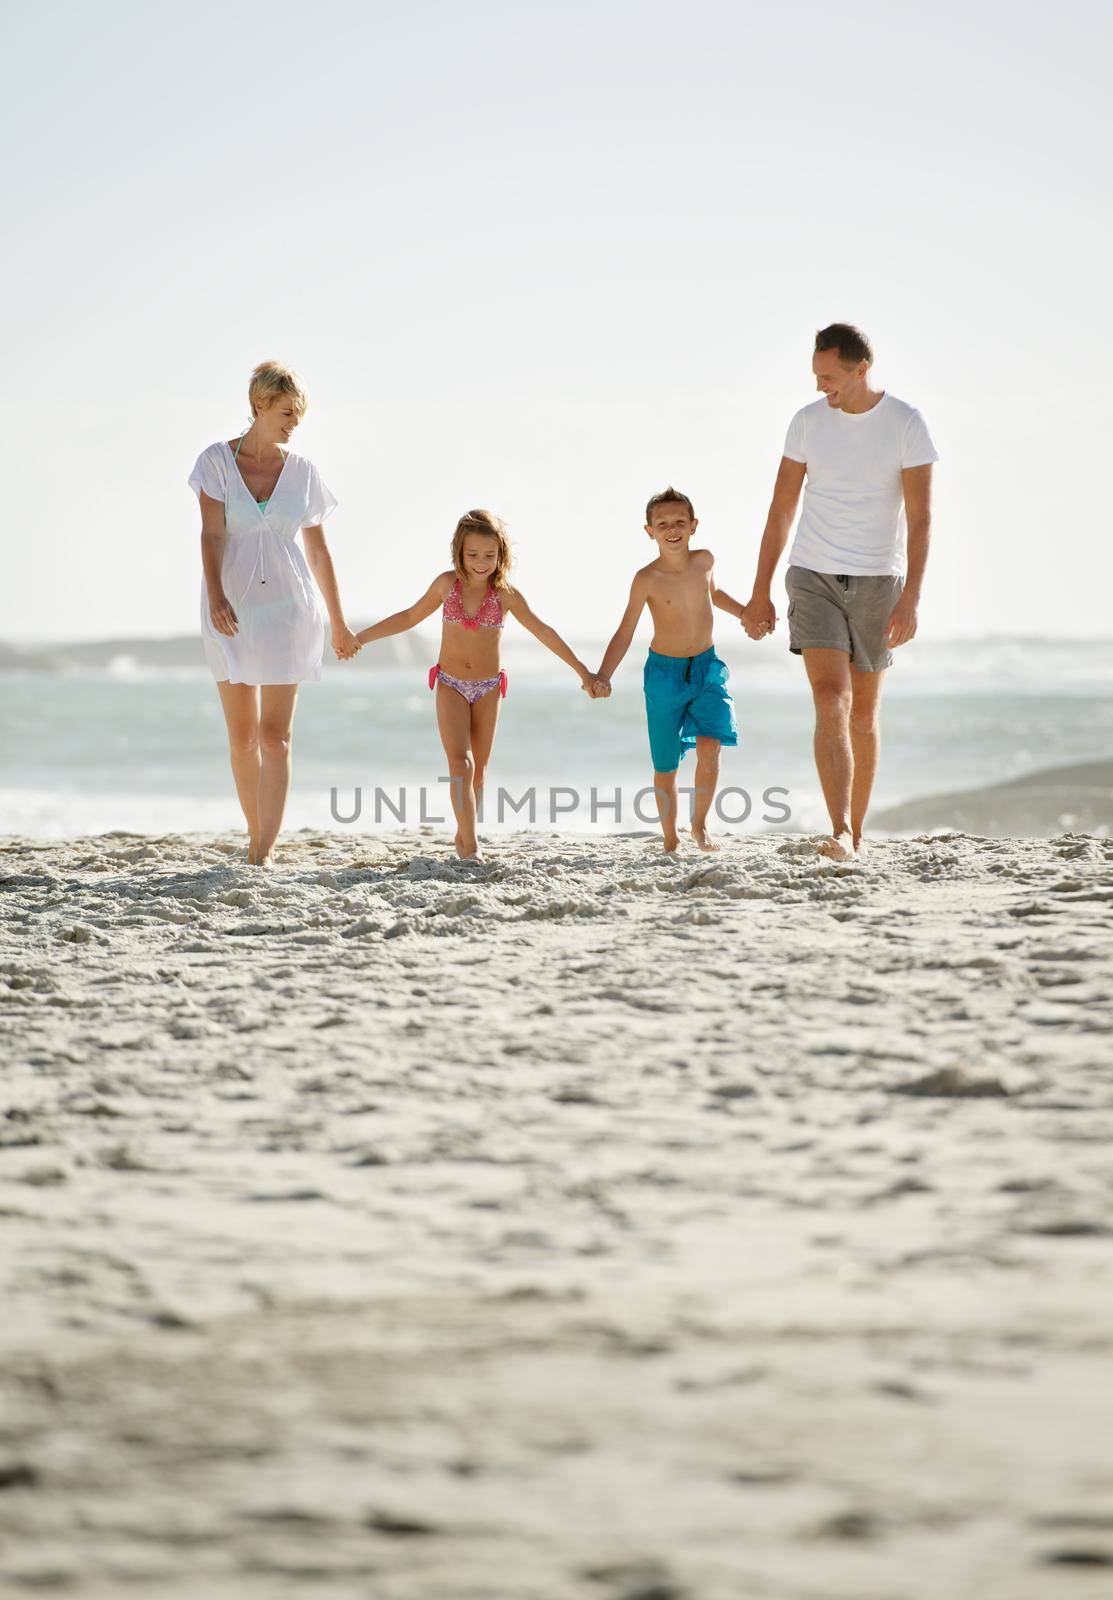 This vacation has brought them closer. A happy young family walking down the beach together in the sunshine